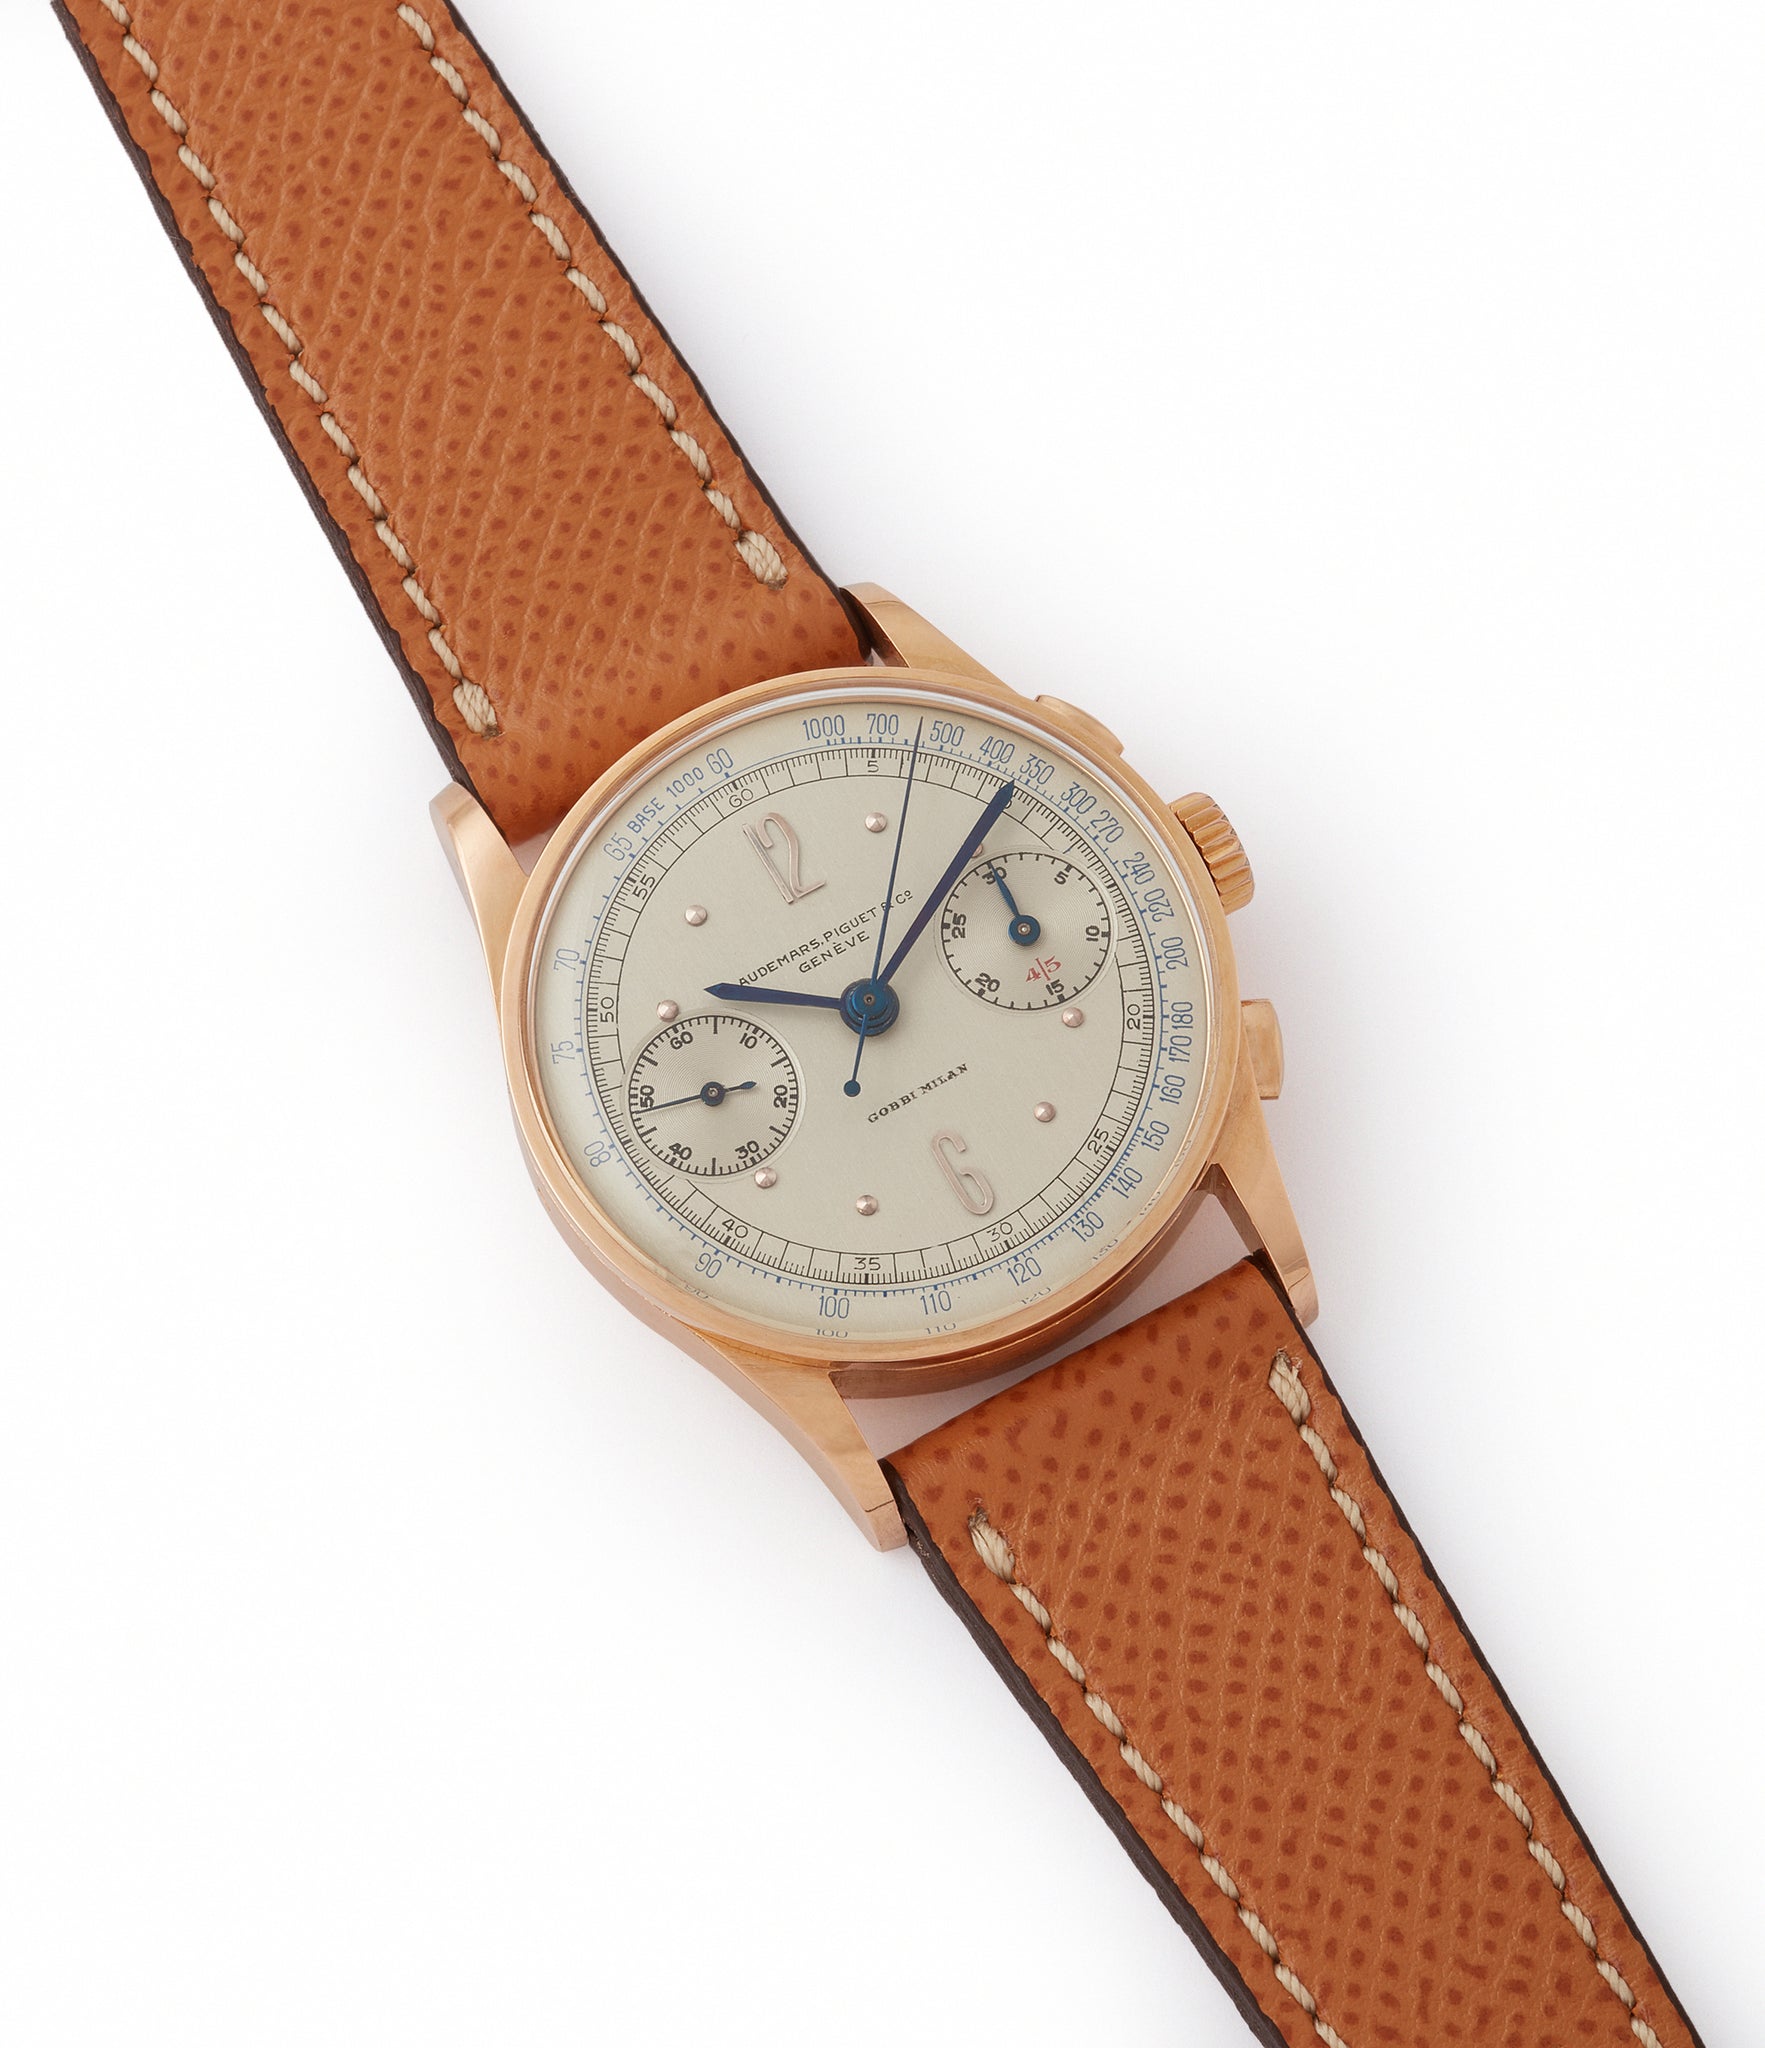 sell vintage Audemars Piguet Chronograph 1939 pink gold watch as featured on Hoodinkee's Bring a Loupe for sale online at A Collected Man London UK specialist of rare watches